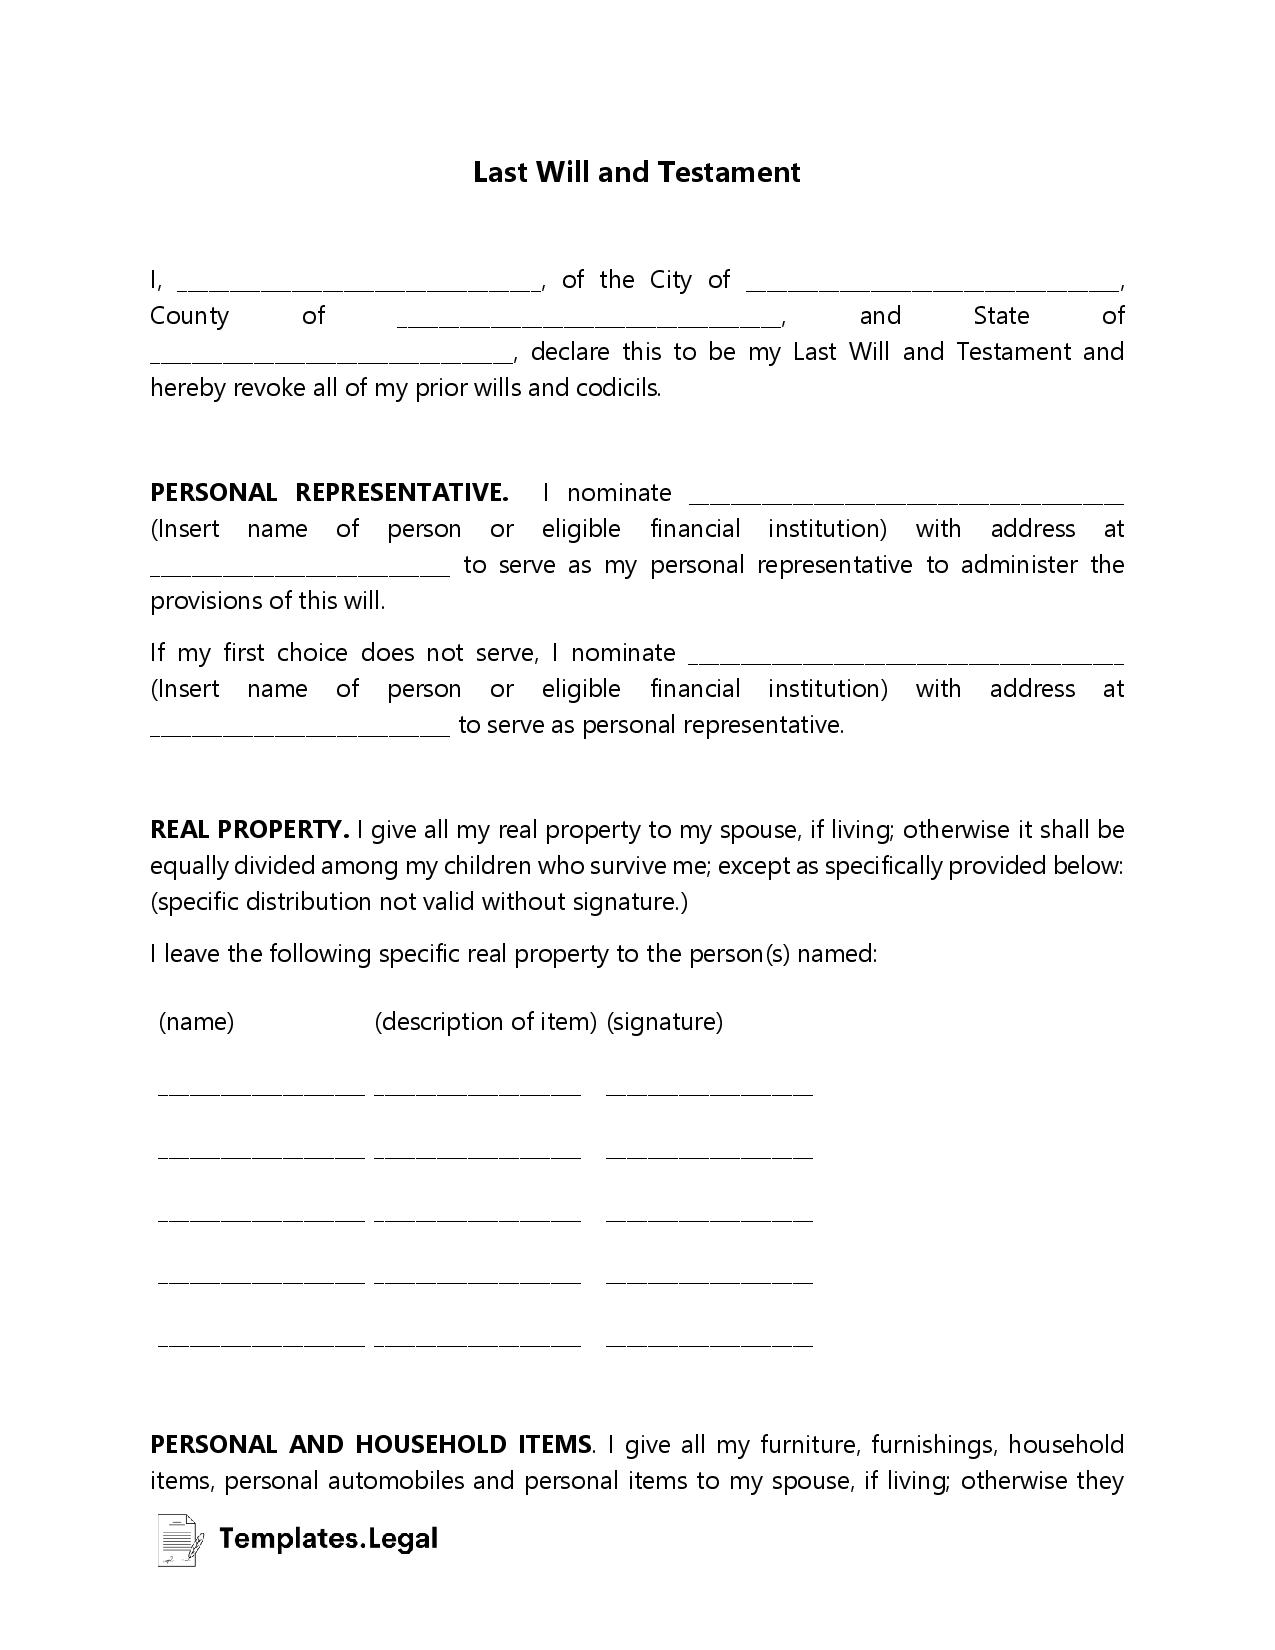 Last Will And Testament Templates Word PDF ODT Templates Legal